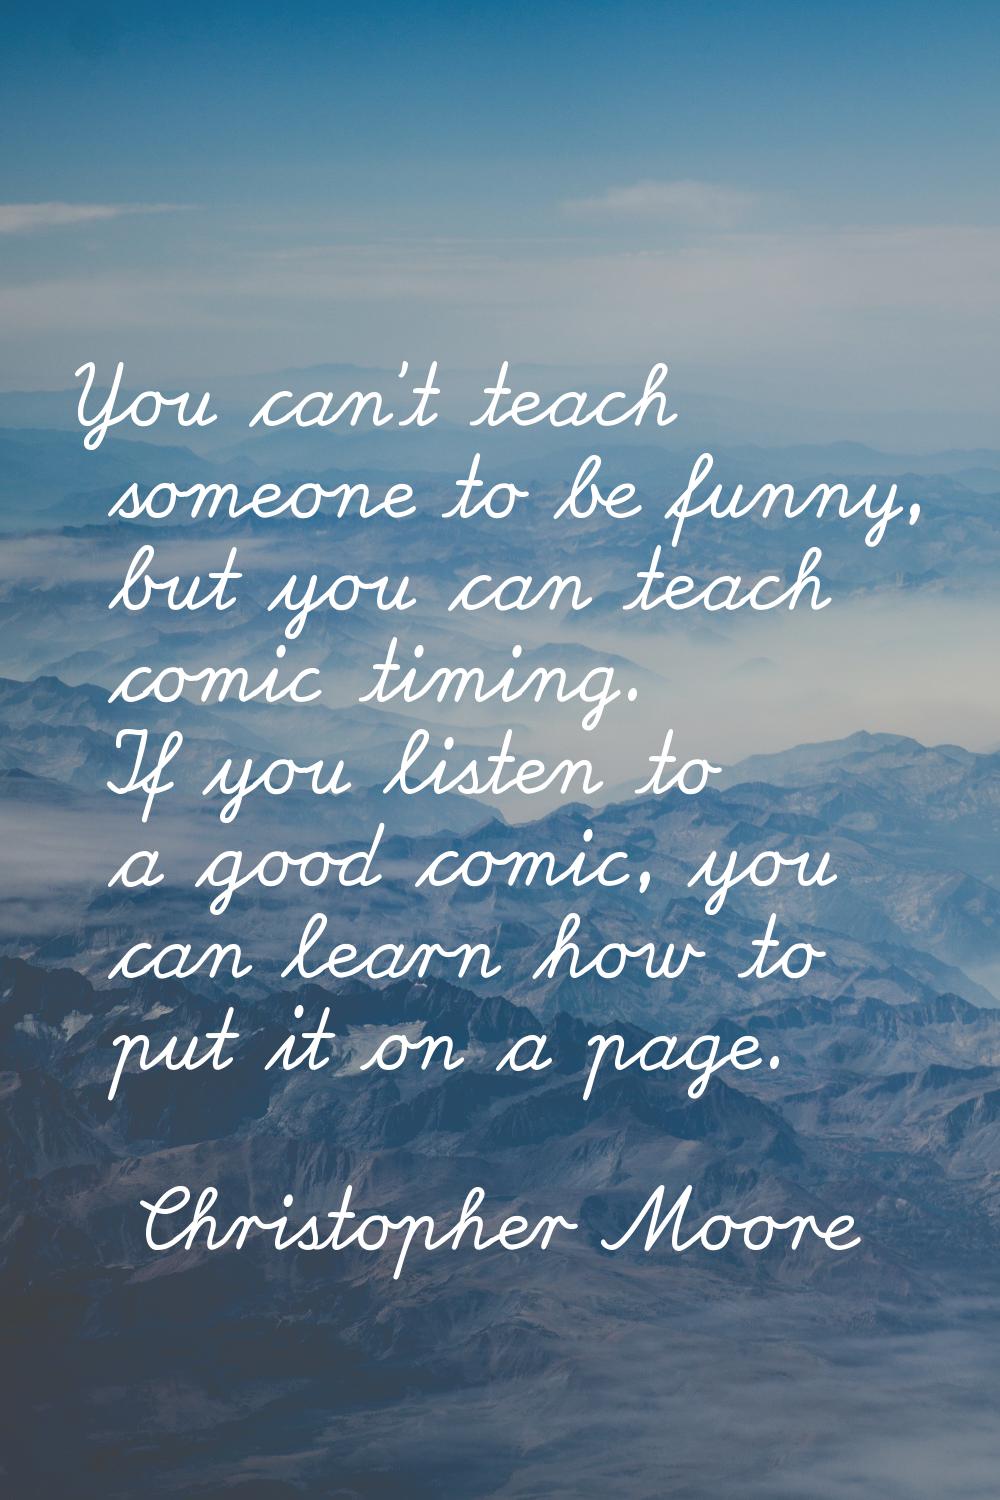 You can't teach someone to be funny, but you can teach comic timing. If you listen to a good comic,